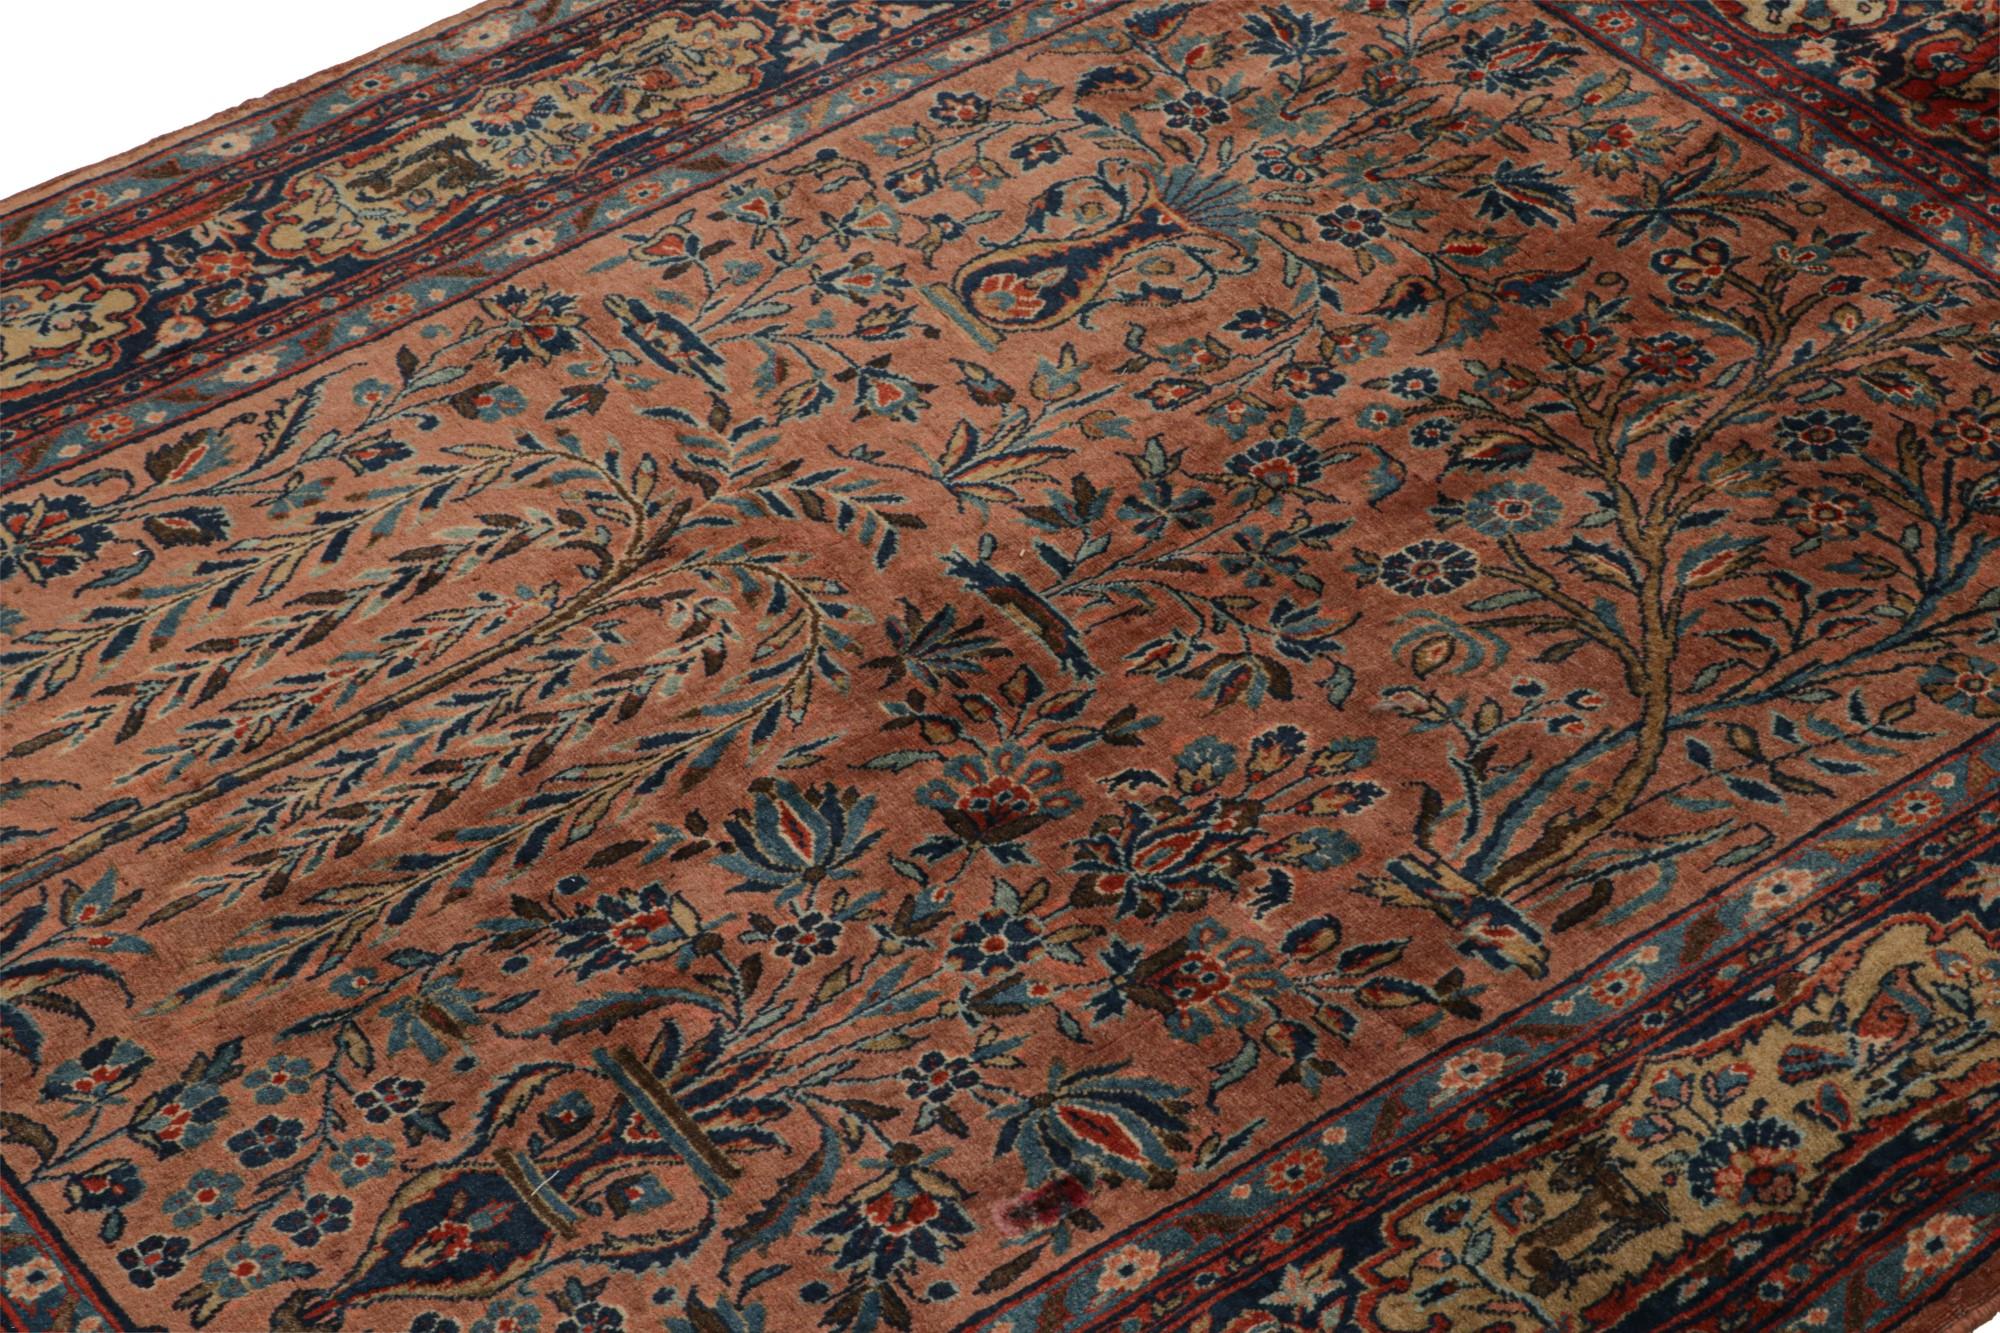 Antique Persian Kashan rug with Pictorial and Floral Patterns, from Rug & Kilim  In Good Condition For Sale In Long Island City, NY